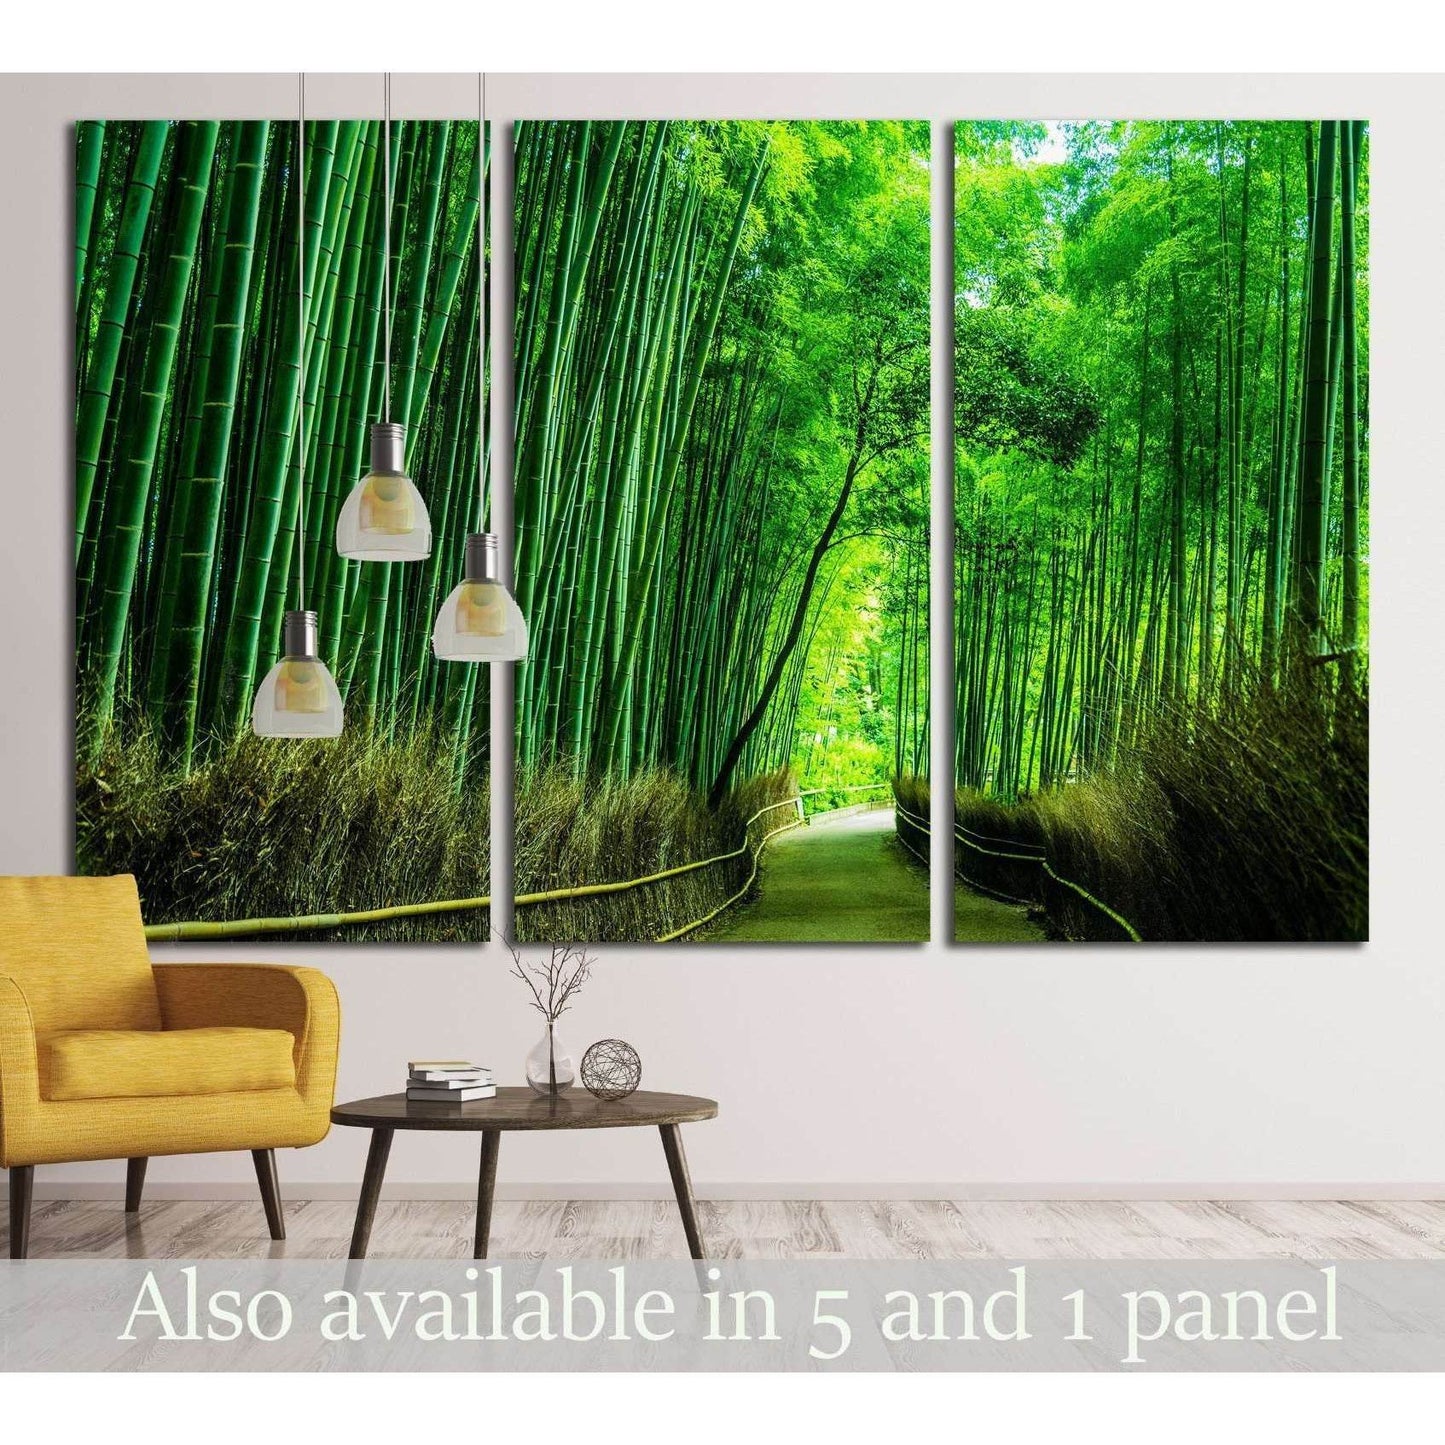 Japanese Bamboo Forest Artwork for Meditation Space DecorThis canvas print captures the enchanting Arashiyama Bamboo Forest in Kyoto, where towering green stalks create a naturally architectured hallway that invites the viewer into a serene, almost otherw